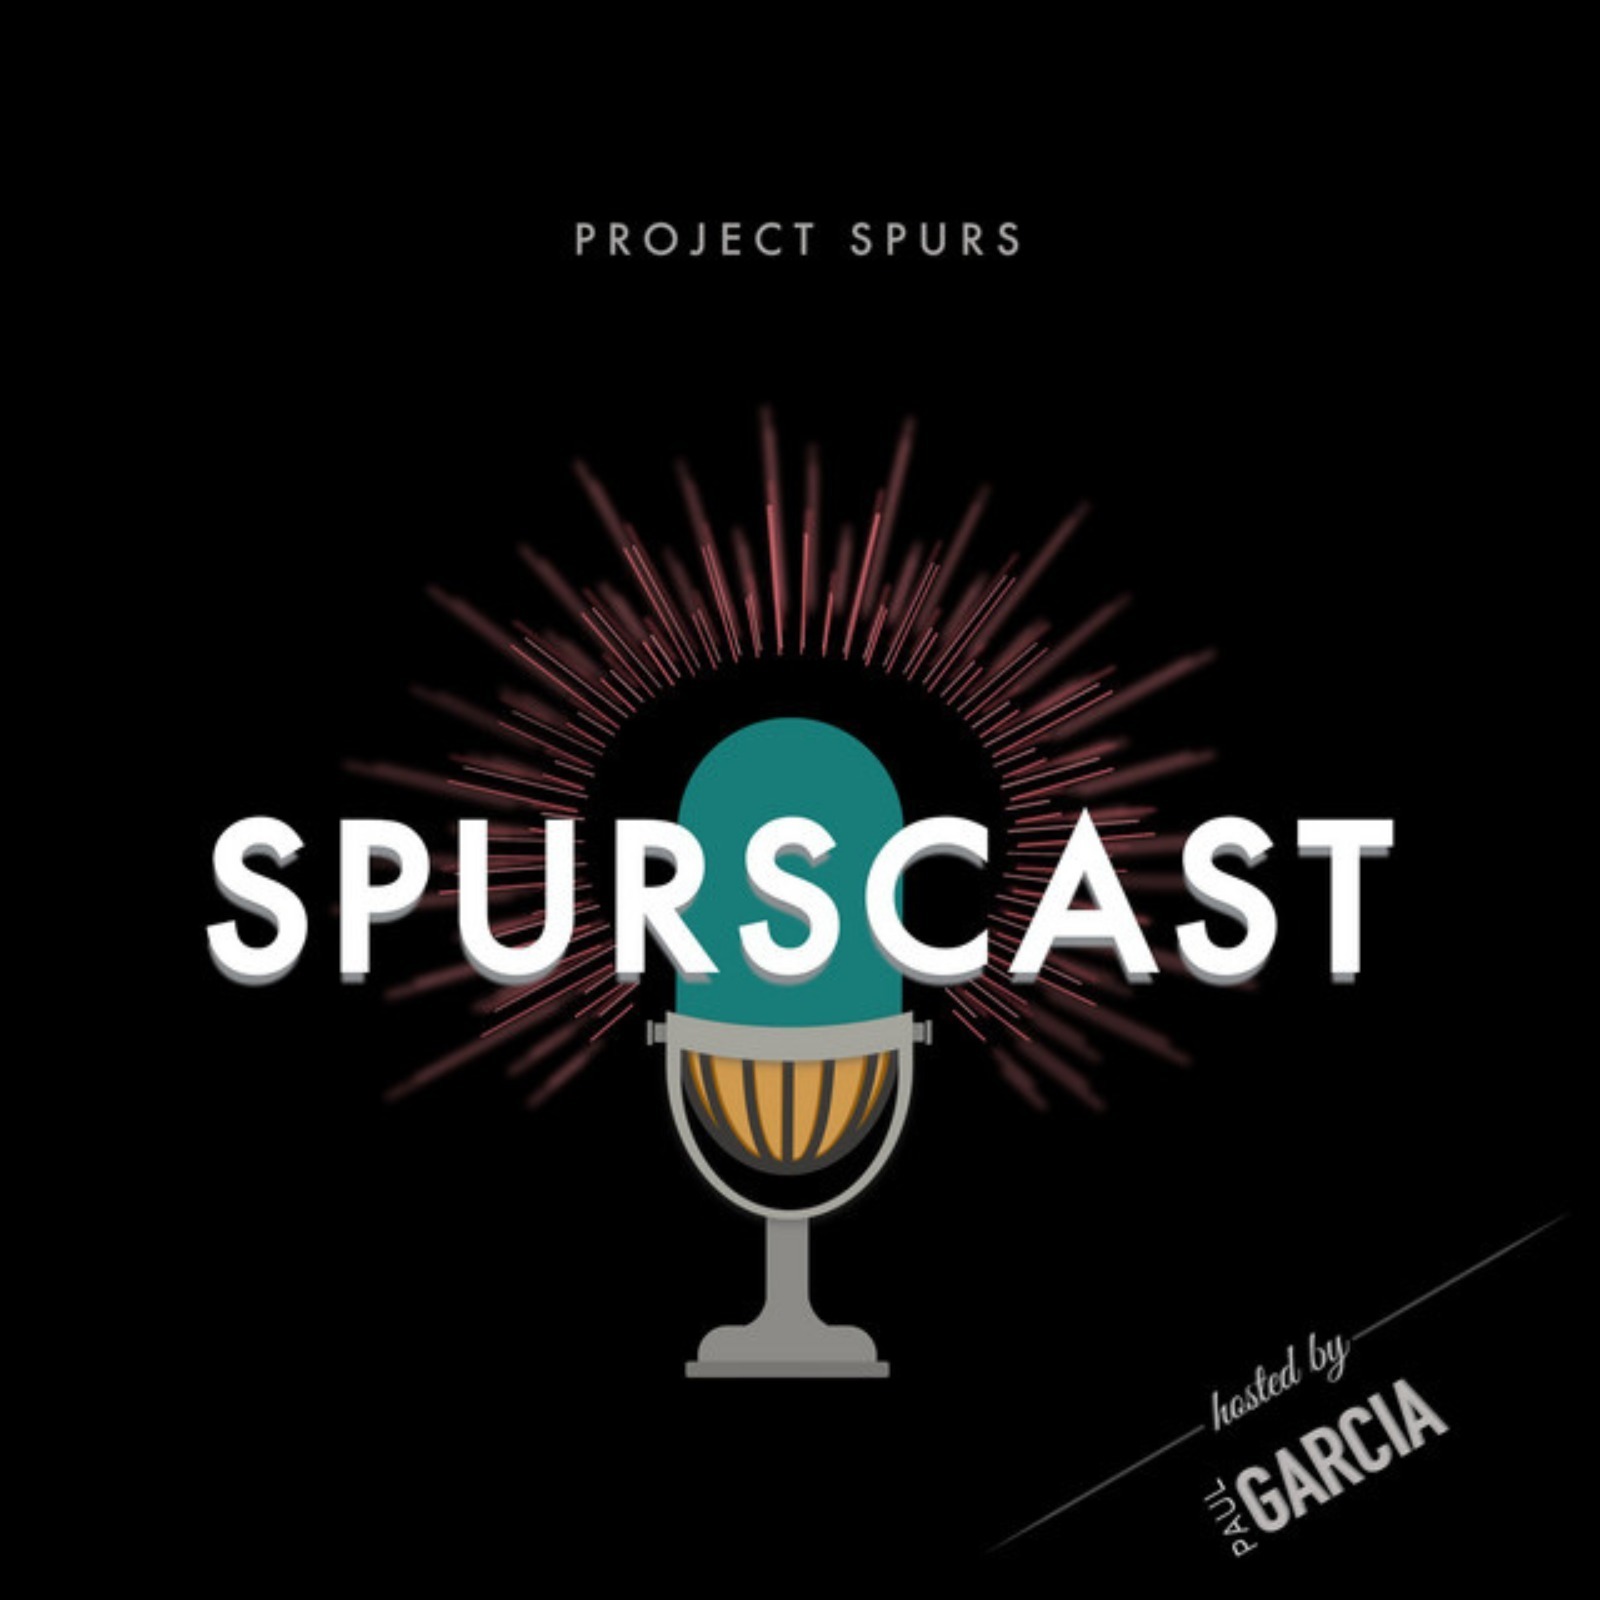 Spurscast Ep. 728: Trade Exceptions and Wemby’s Efficient Scoring on a Minutes Restriction